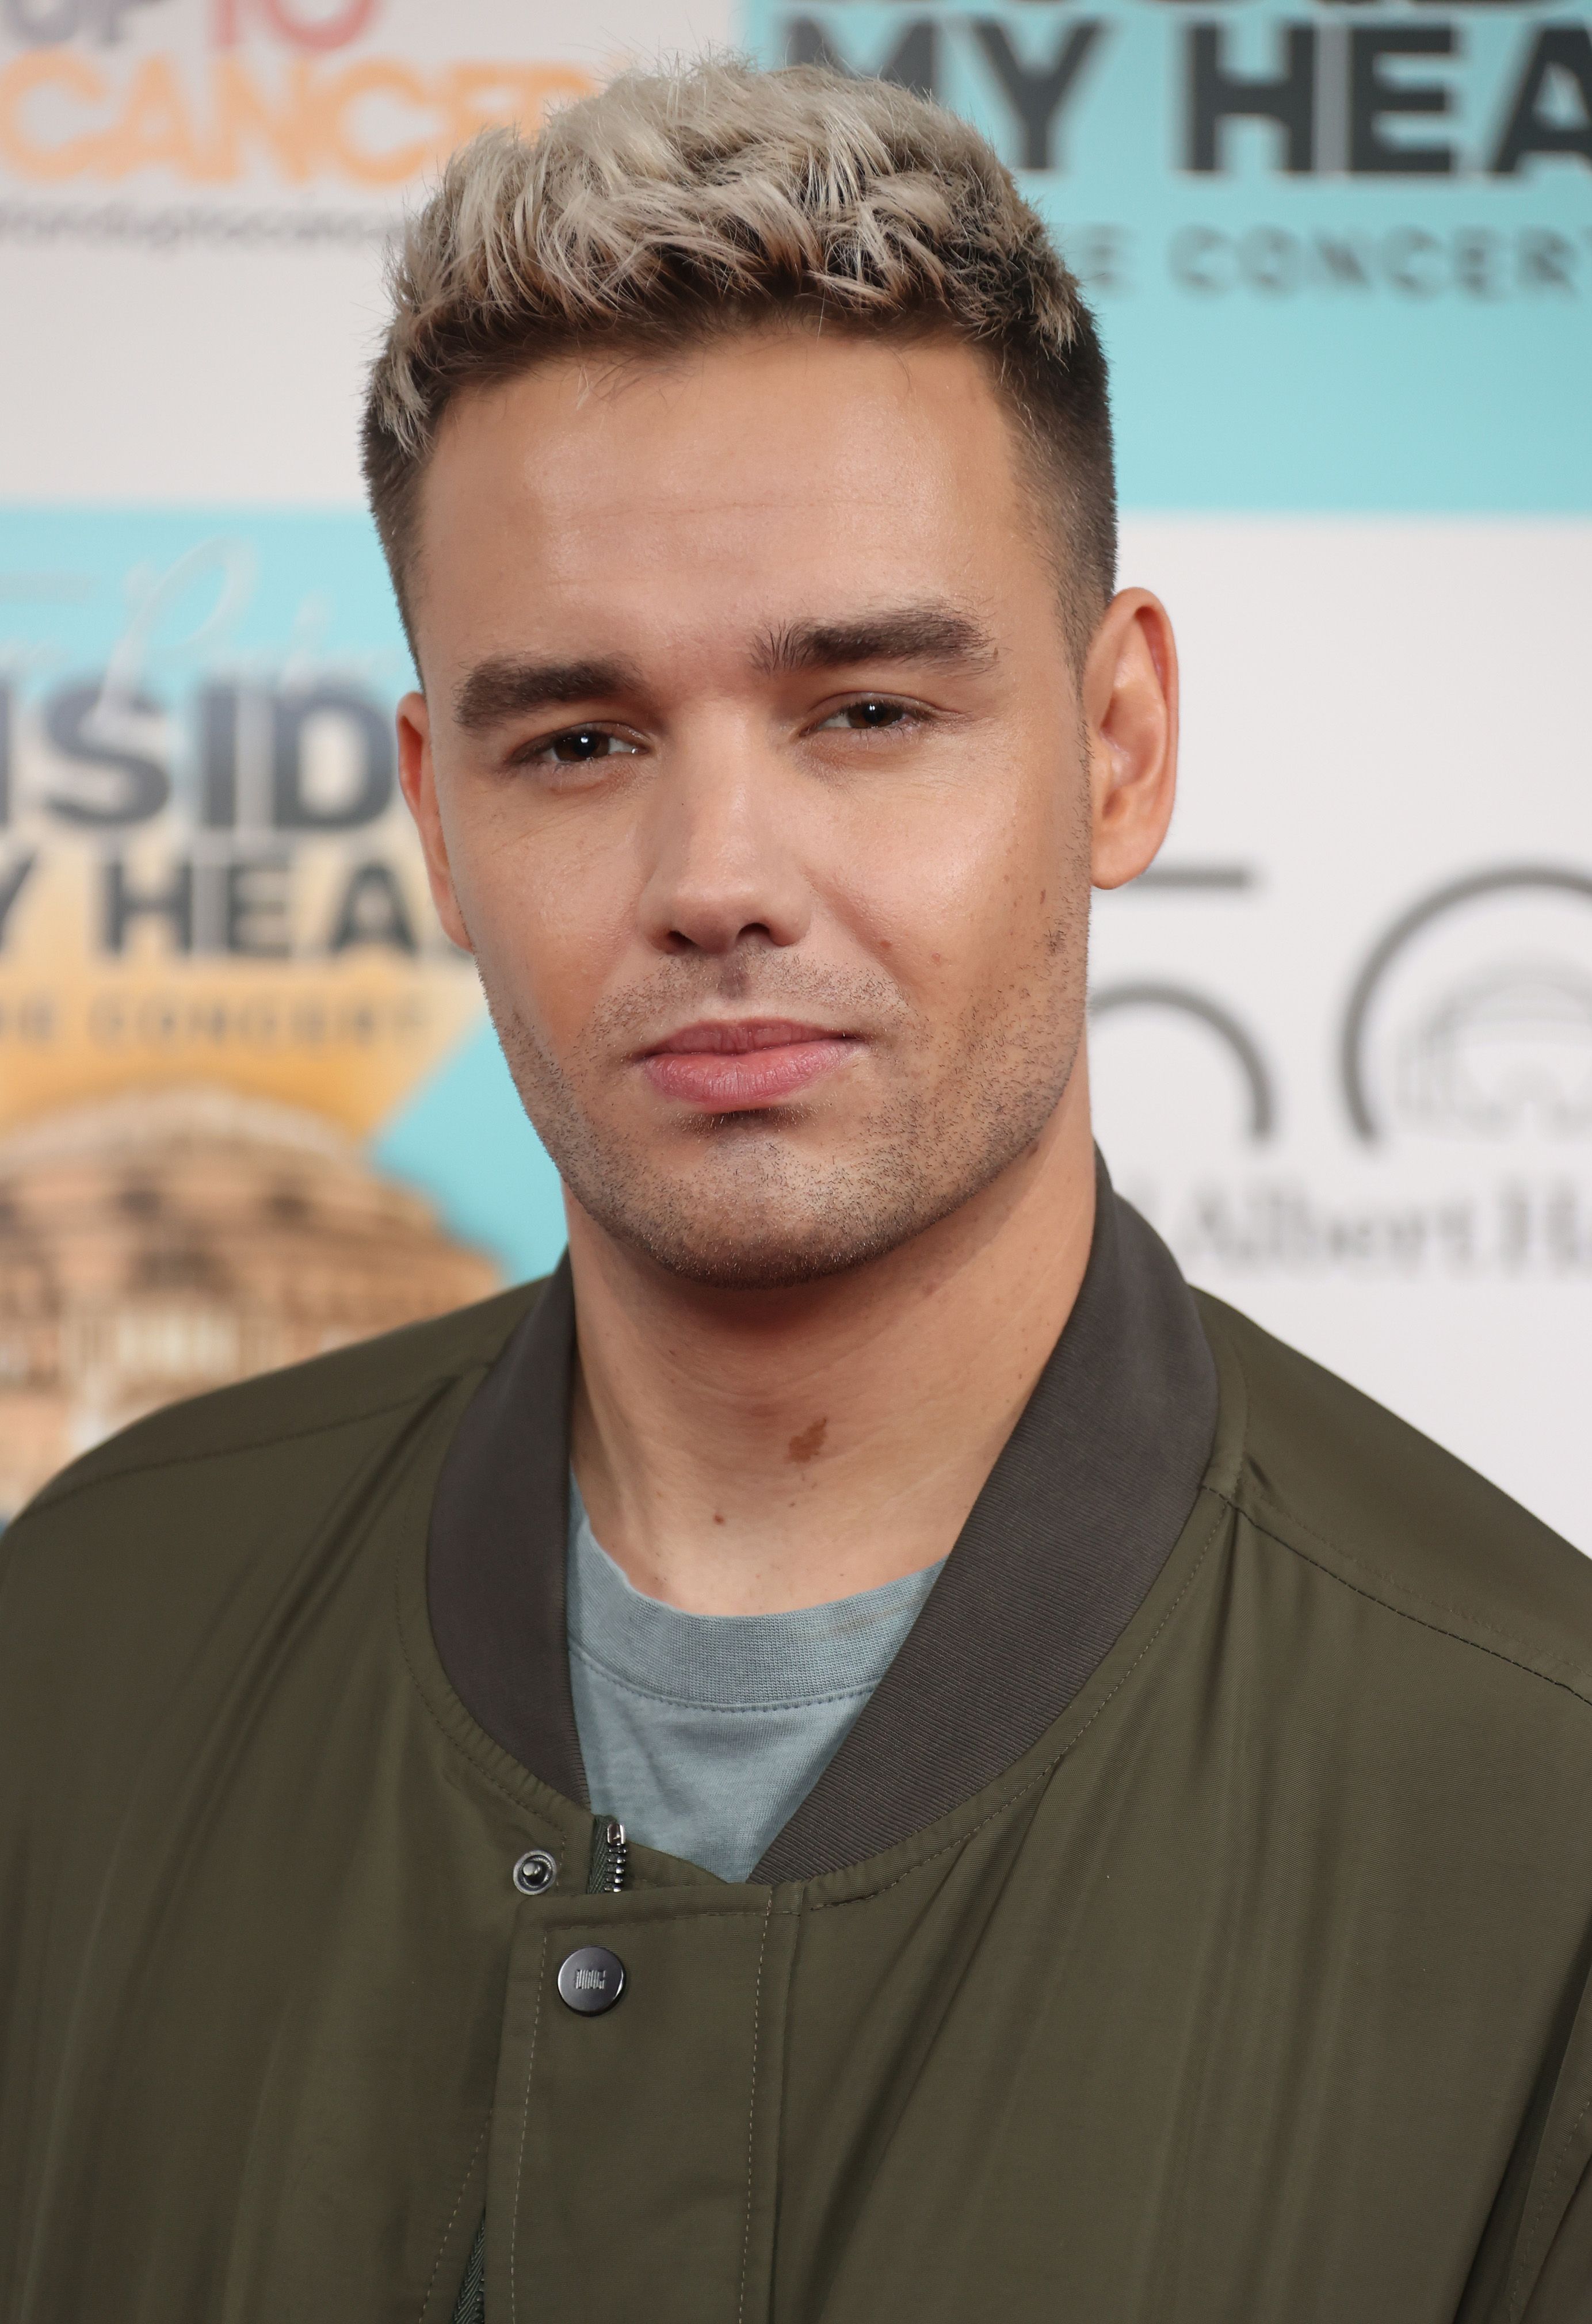  Liam Payne during the "Inside My Head - The Concert" at Royal Albert Hall on September 20, 2021 in London, England. | Source: Getty Images